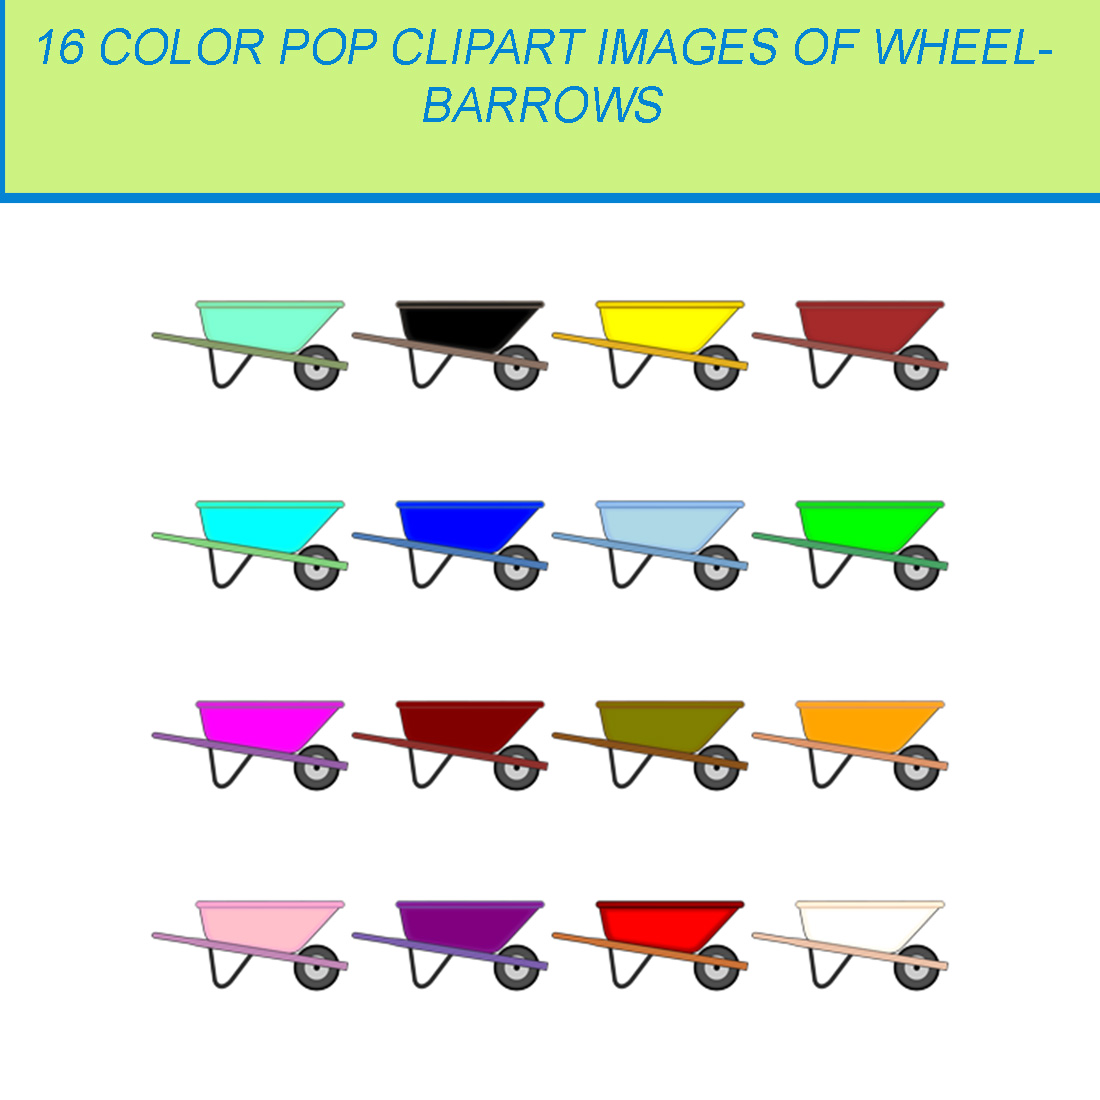 16 COLOR POP CLIPART IMAGES OF WHEELBARROWS cover image.